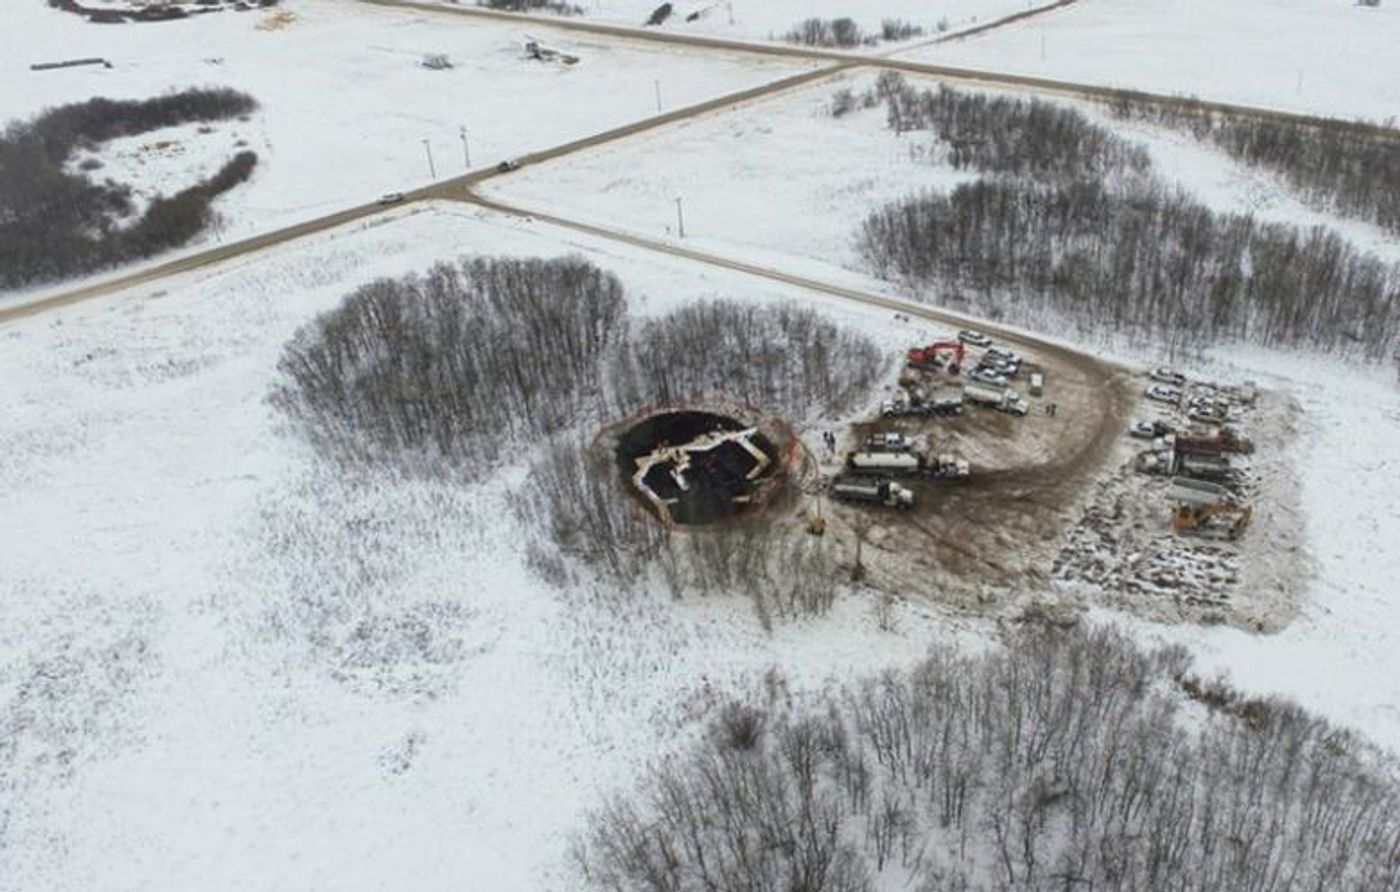 The site of an oil pipeline spill is seen in an aerial photograph provided by Indigenous and Northern Affairs Canada, near Stoughton, Saskatchewan, Canada taken on January 23, 2017. INAC/Handout via Reuters